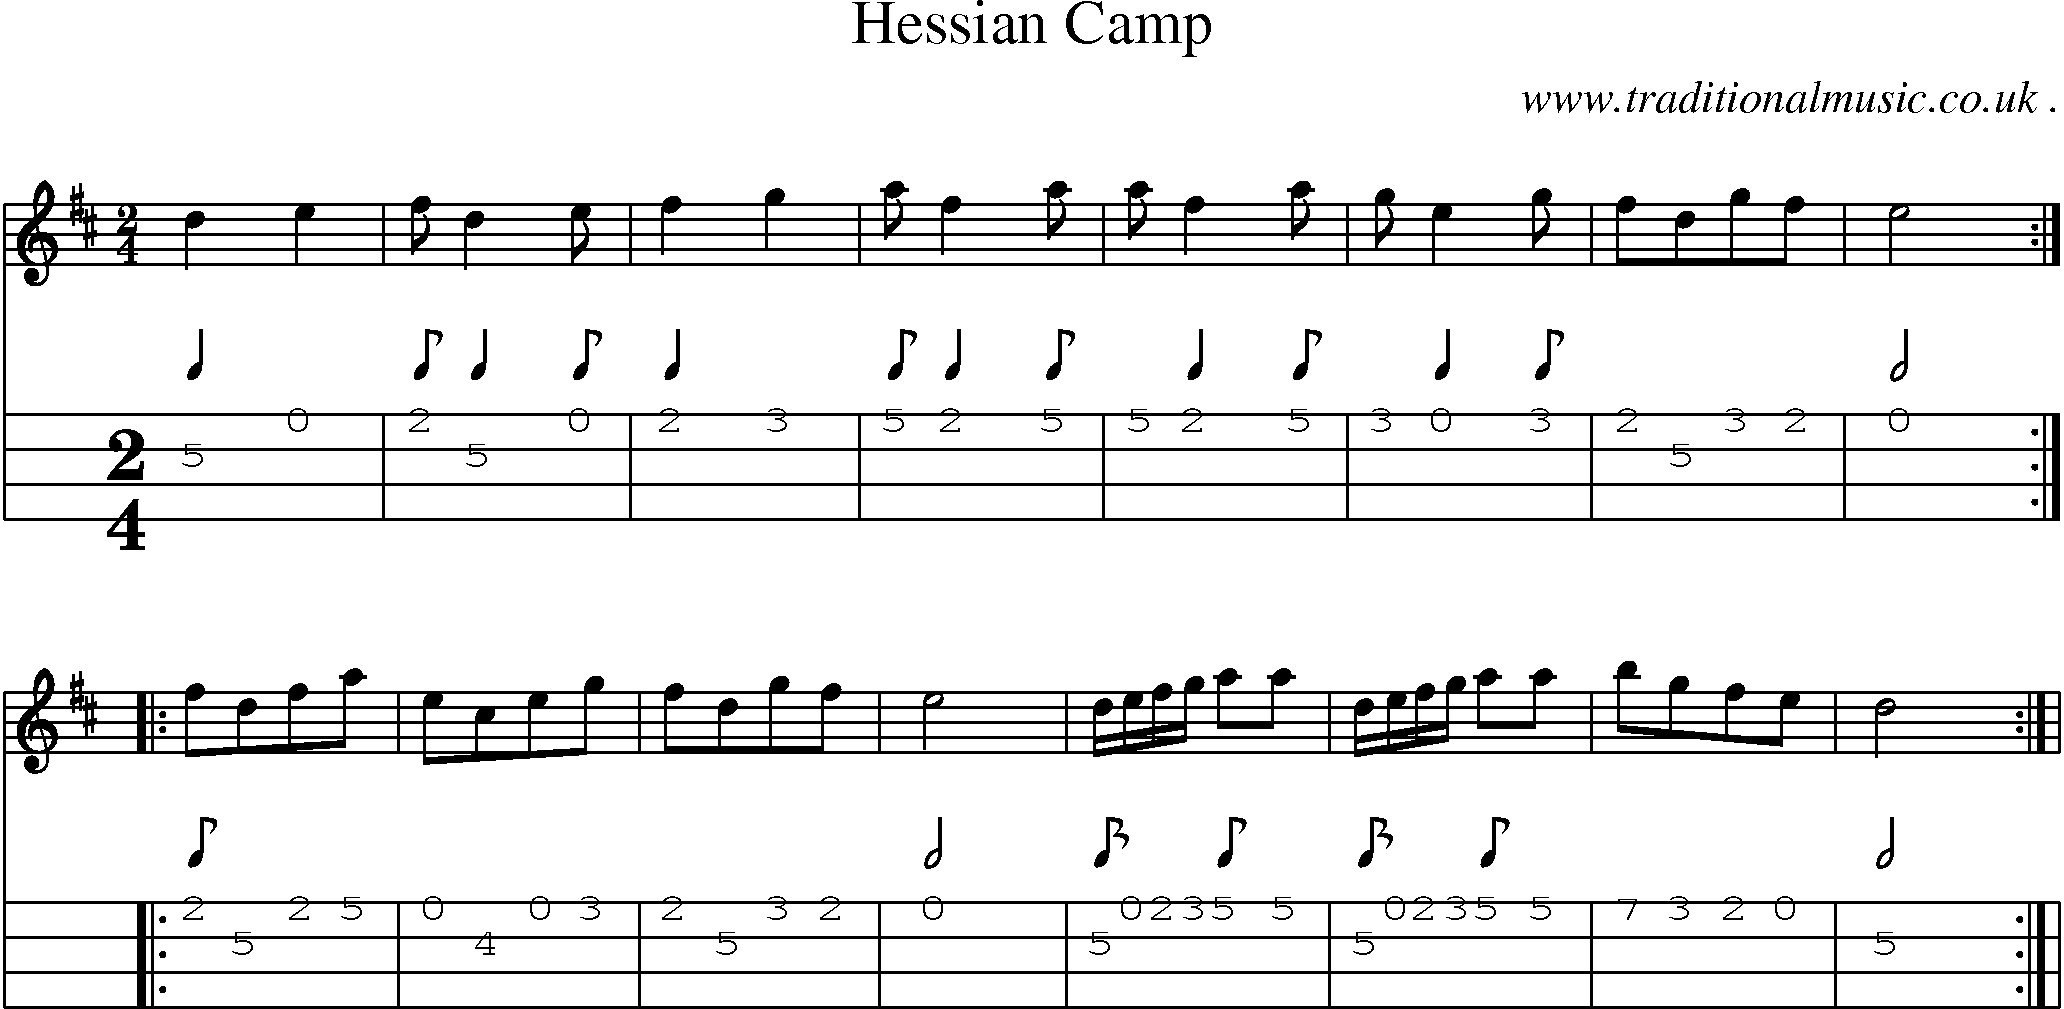 Sheet-Music and Mandolin Tabs for Hessian Camp